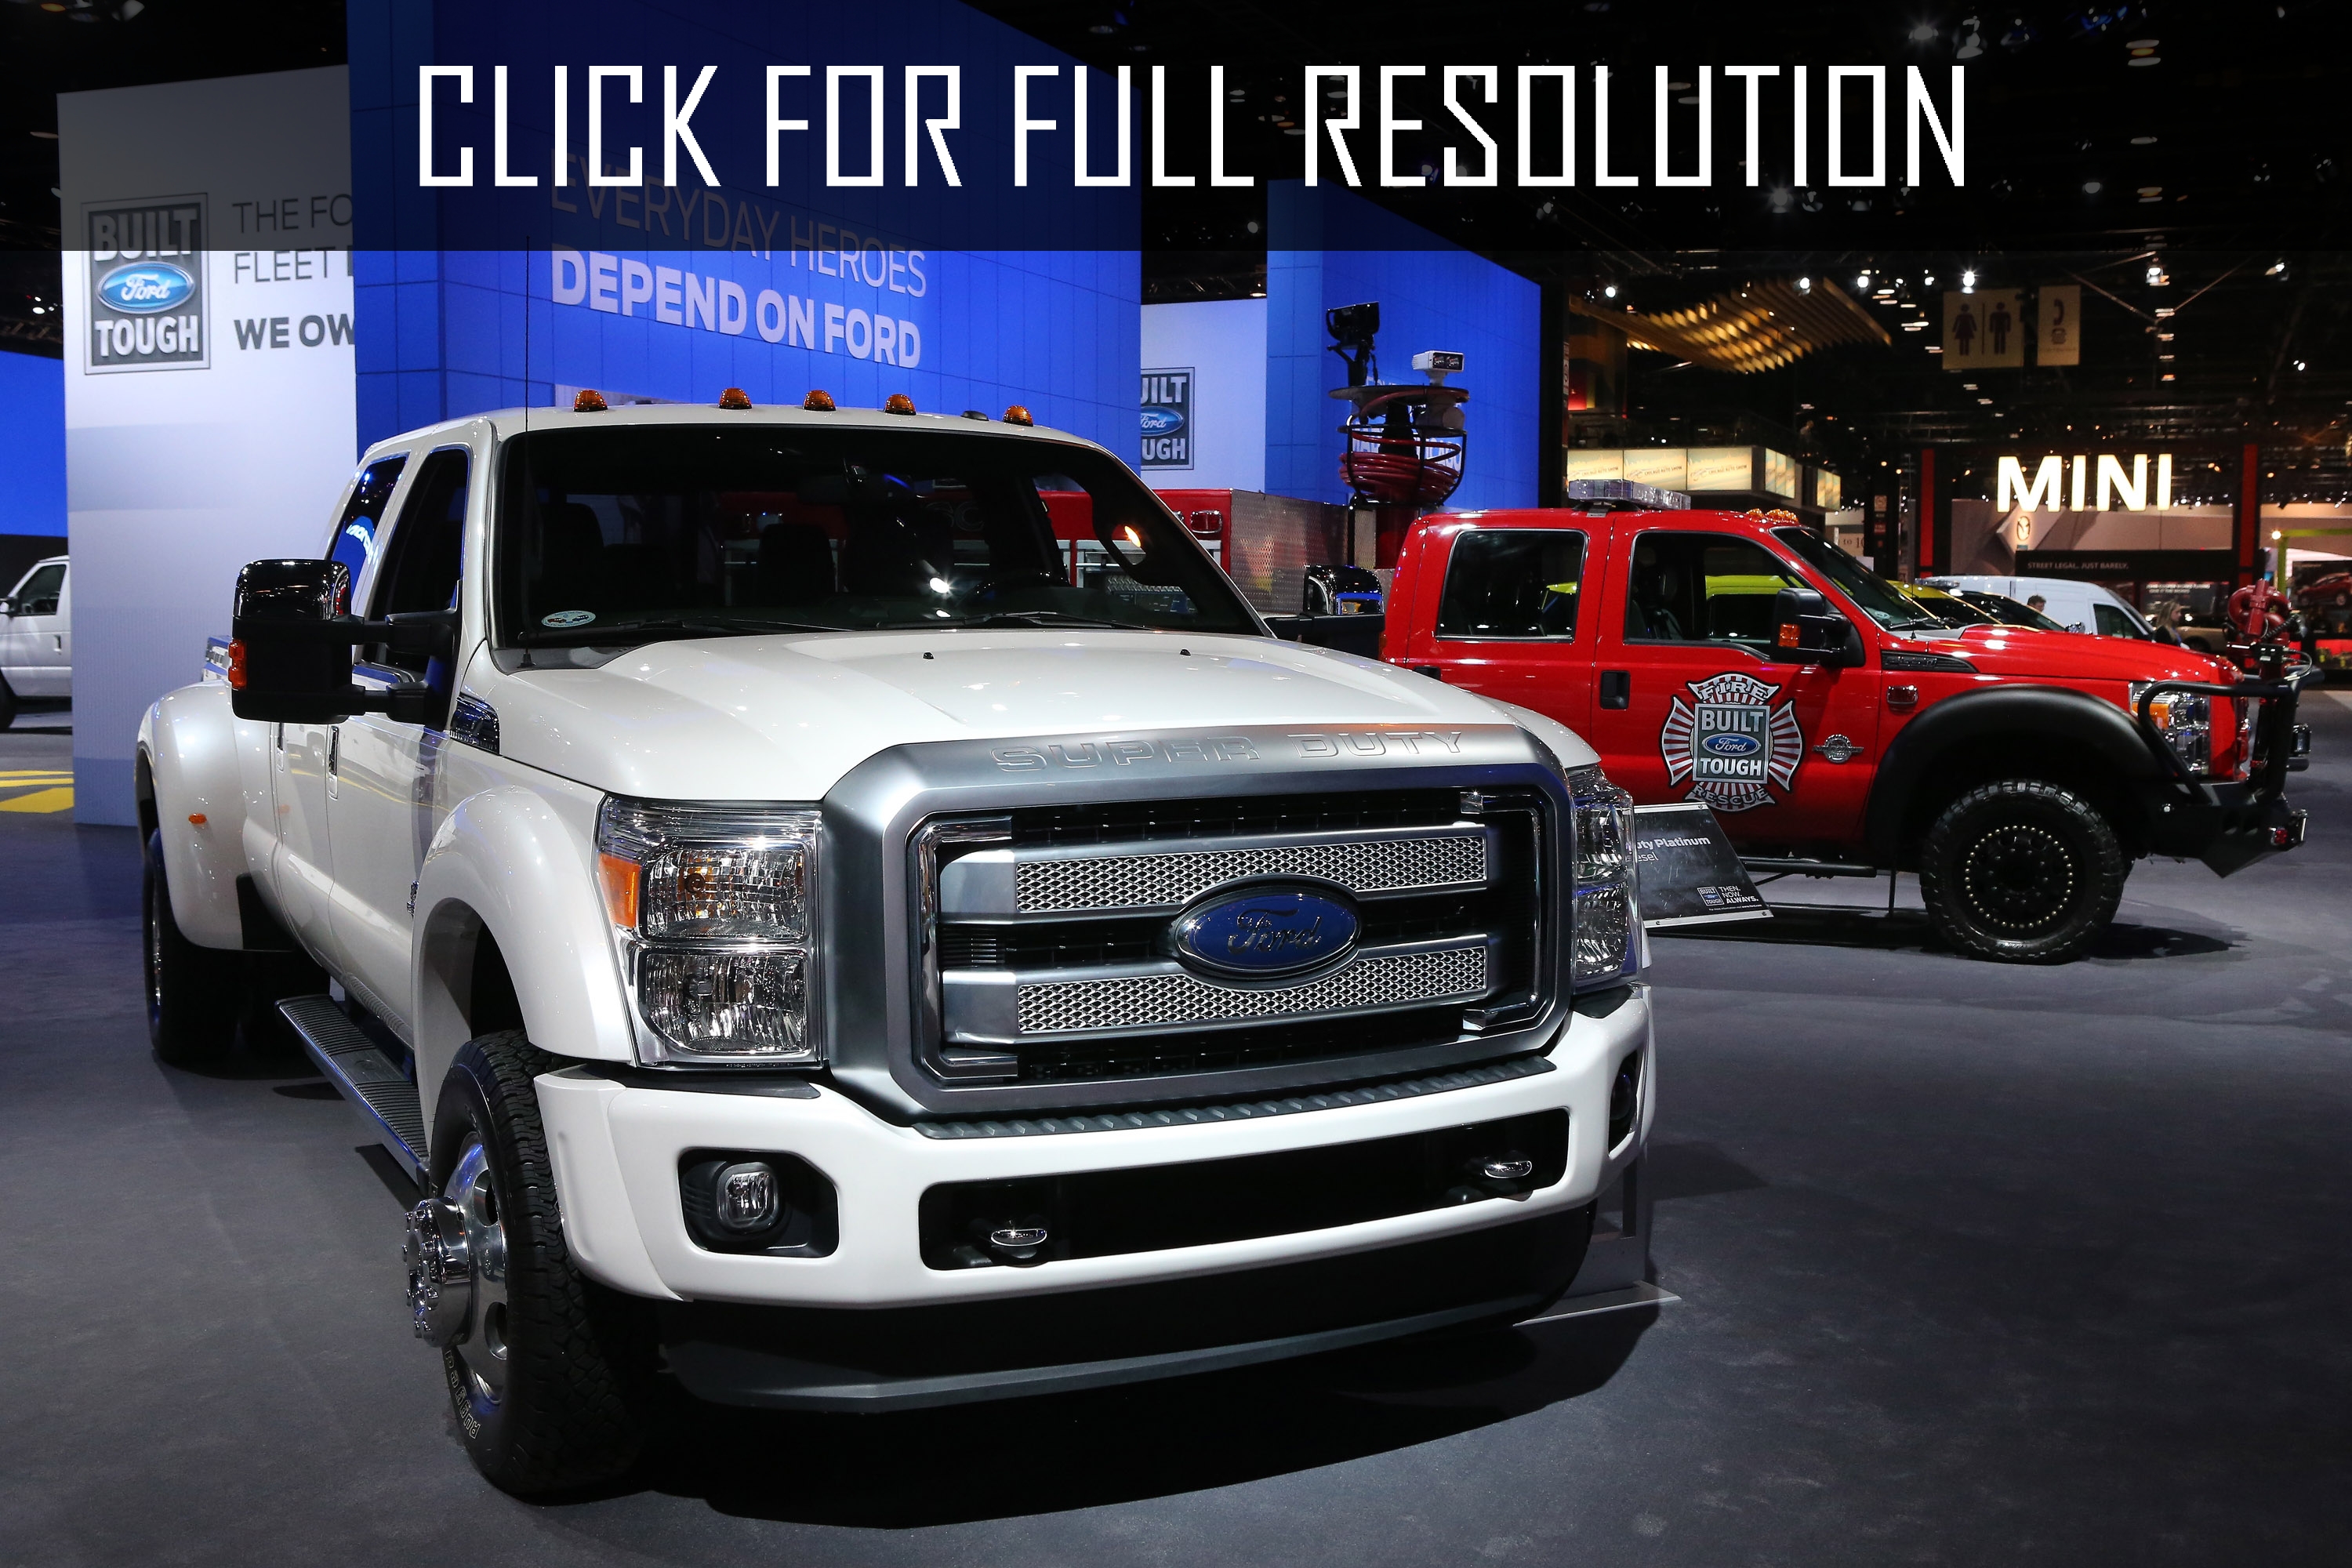 2013 Ford F450